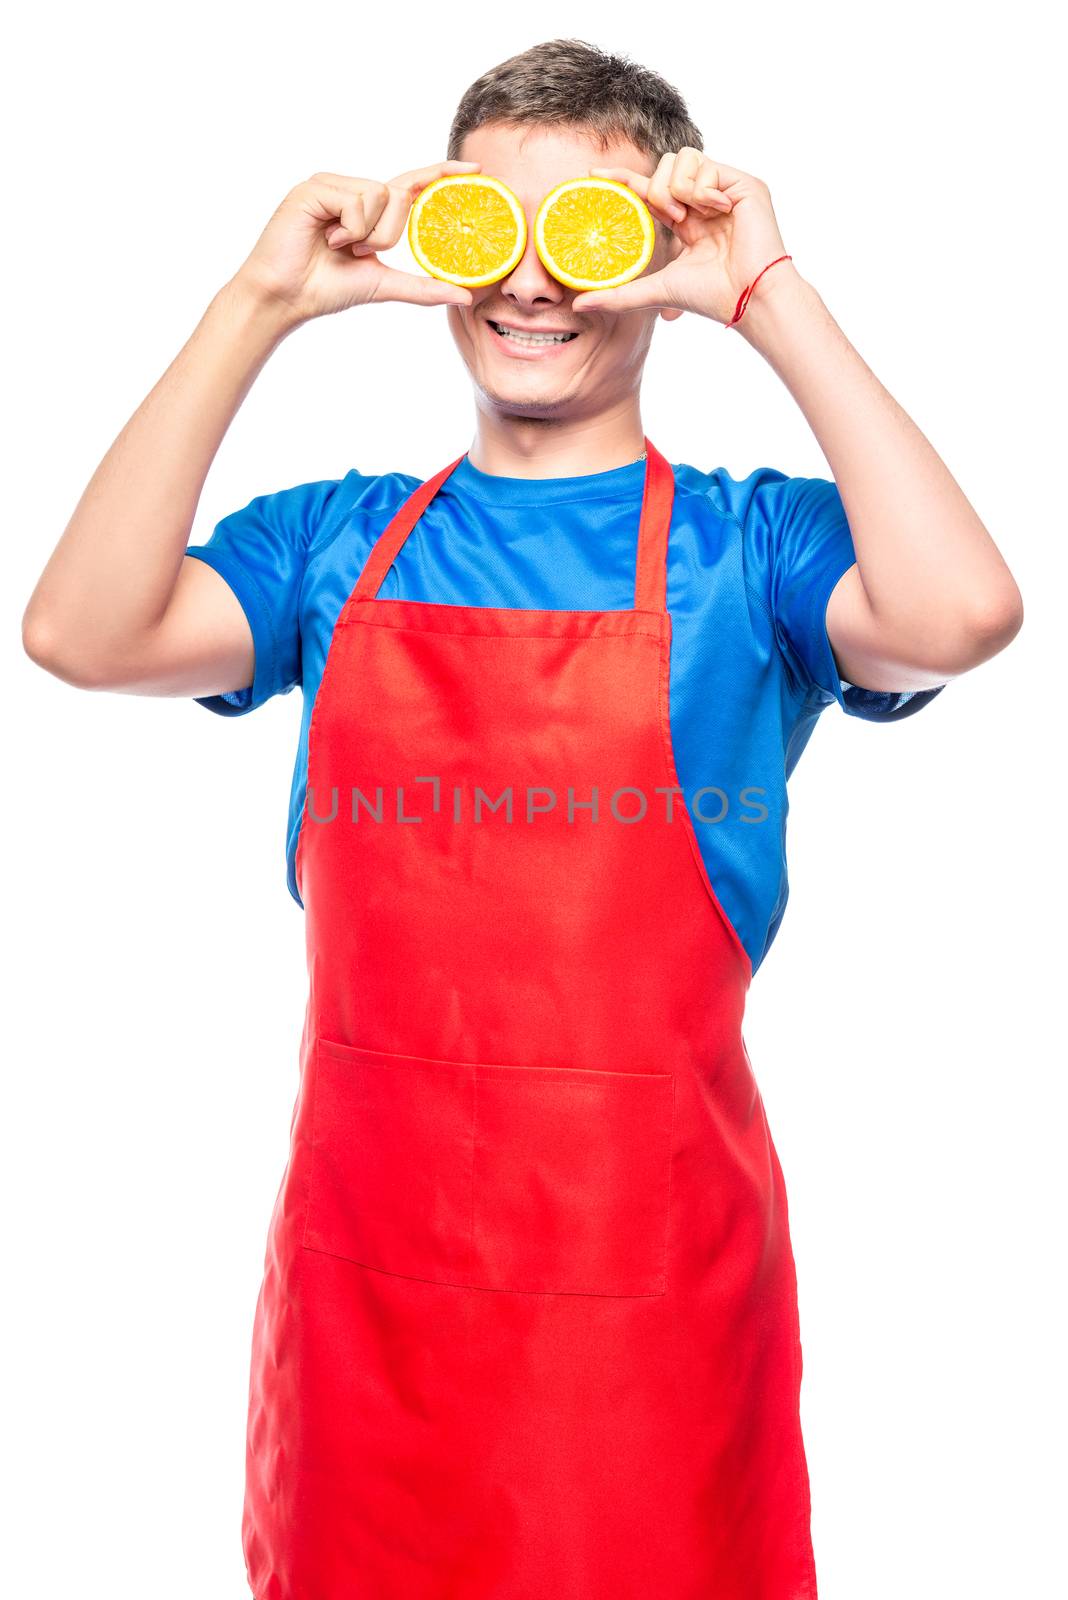 man in an apron fun photo with oranges on a white background by kosmsos111